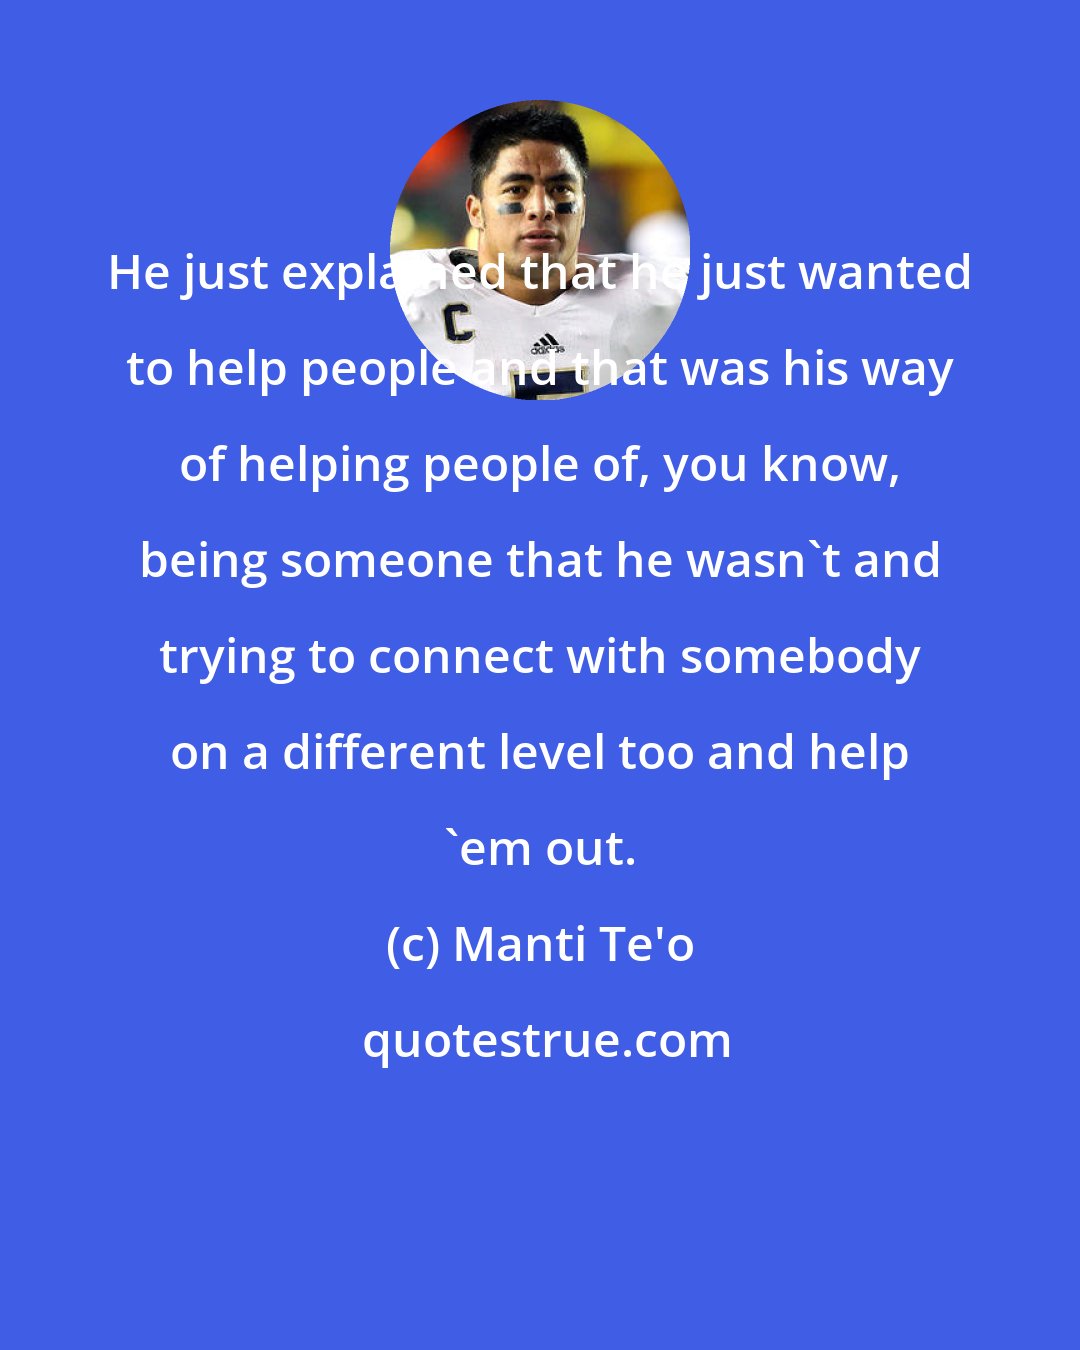 Manti Te'o: He just explained that he just wanted to help people and that was his way of helping people of, you know, being someone that he wasn't and trying to connect with somebody on a different level too and help 'em out.